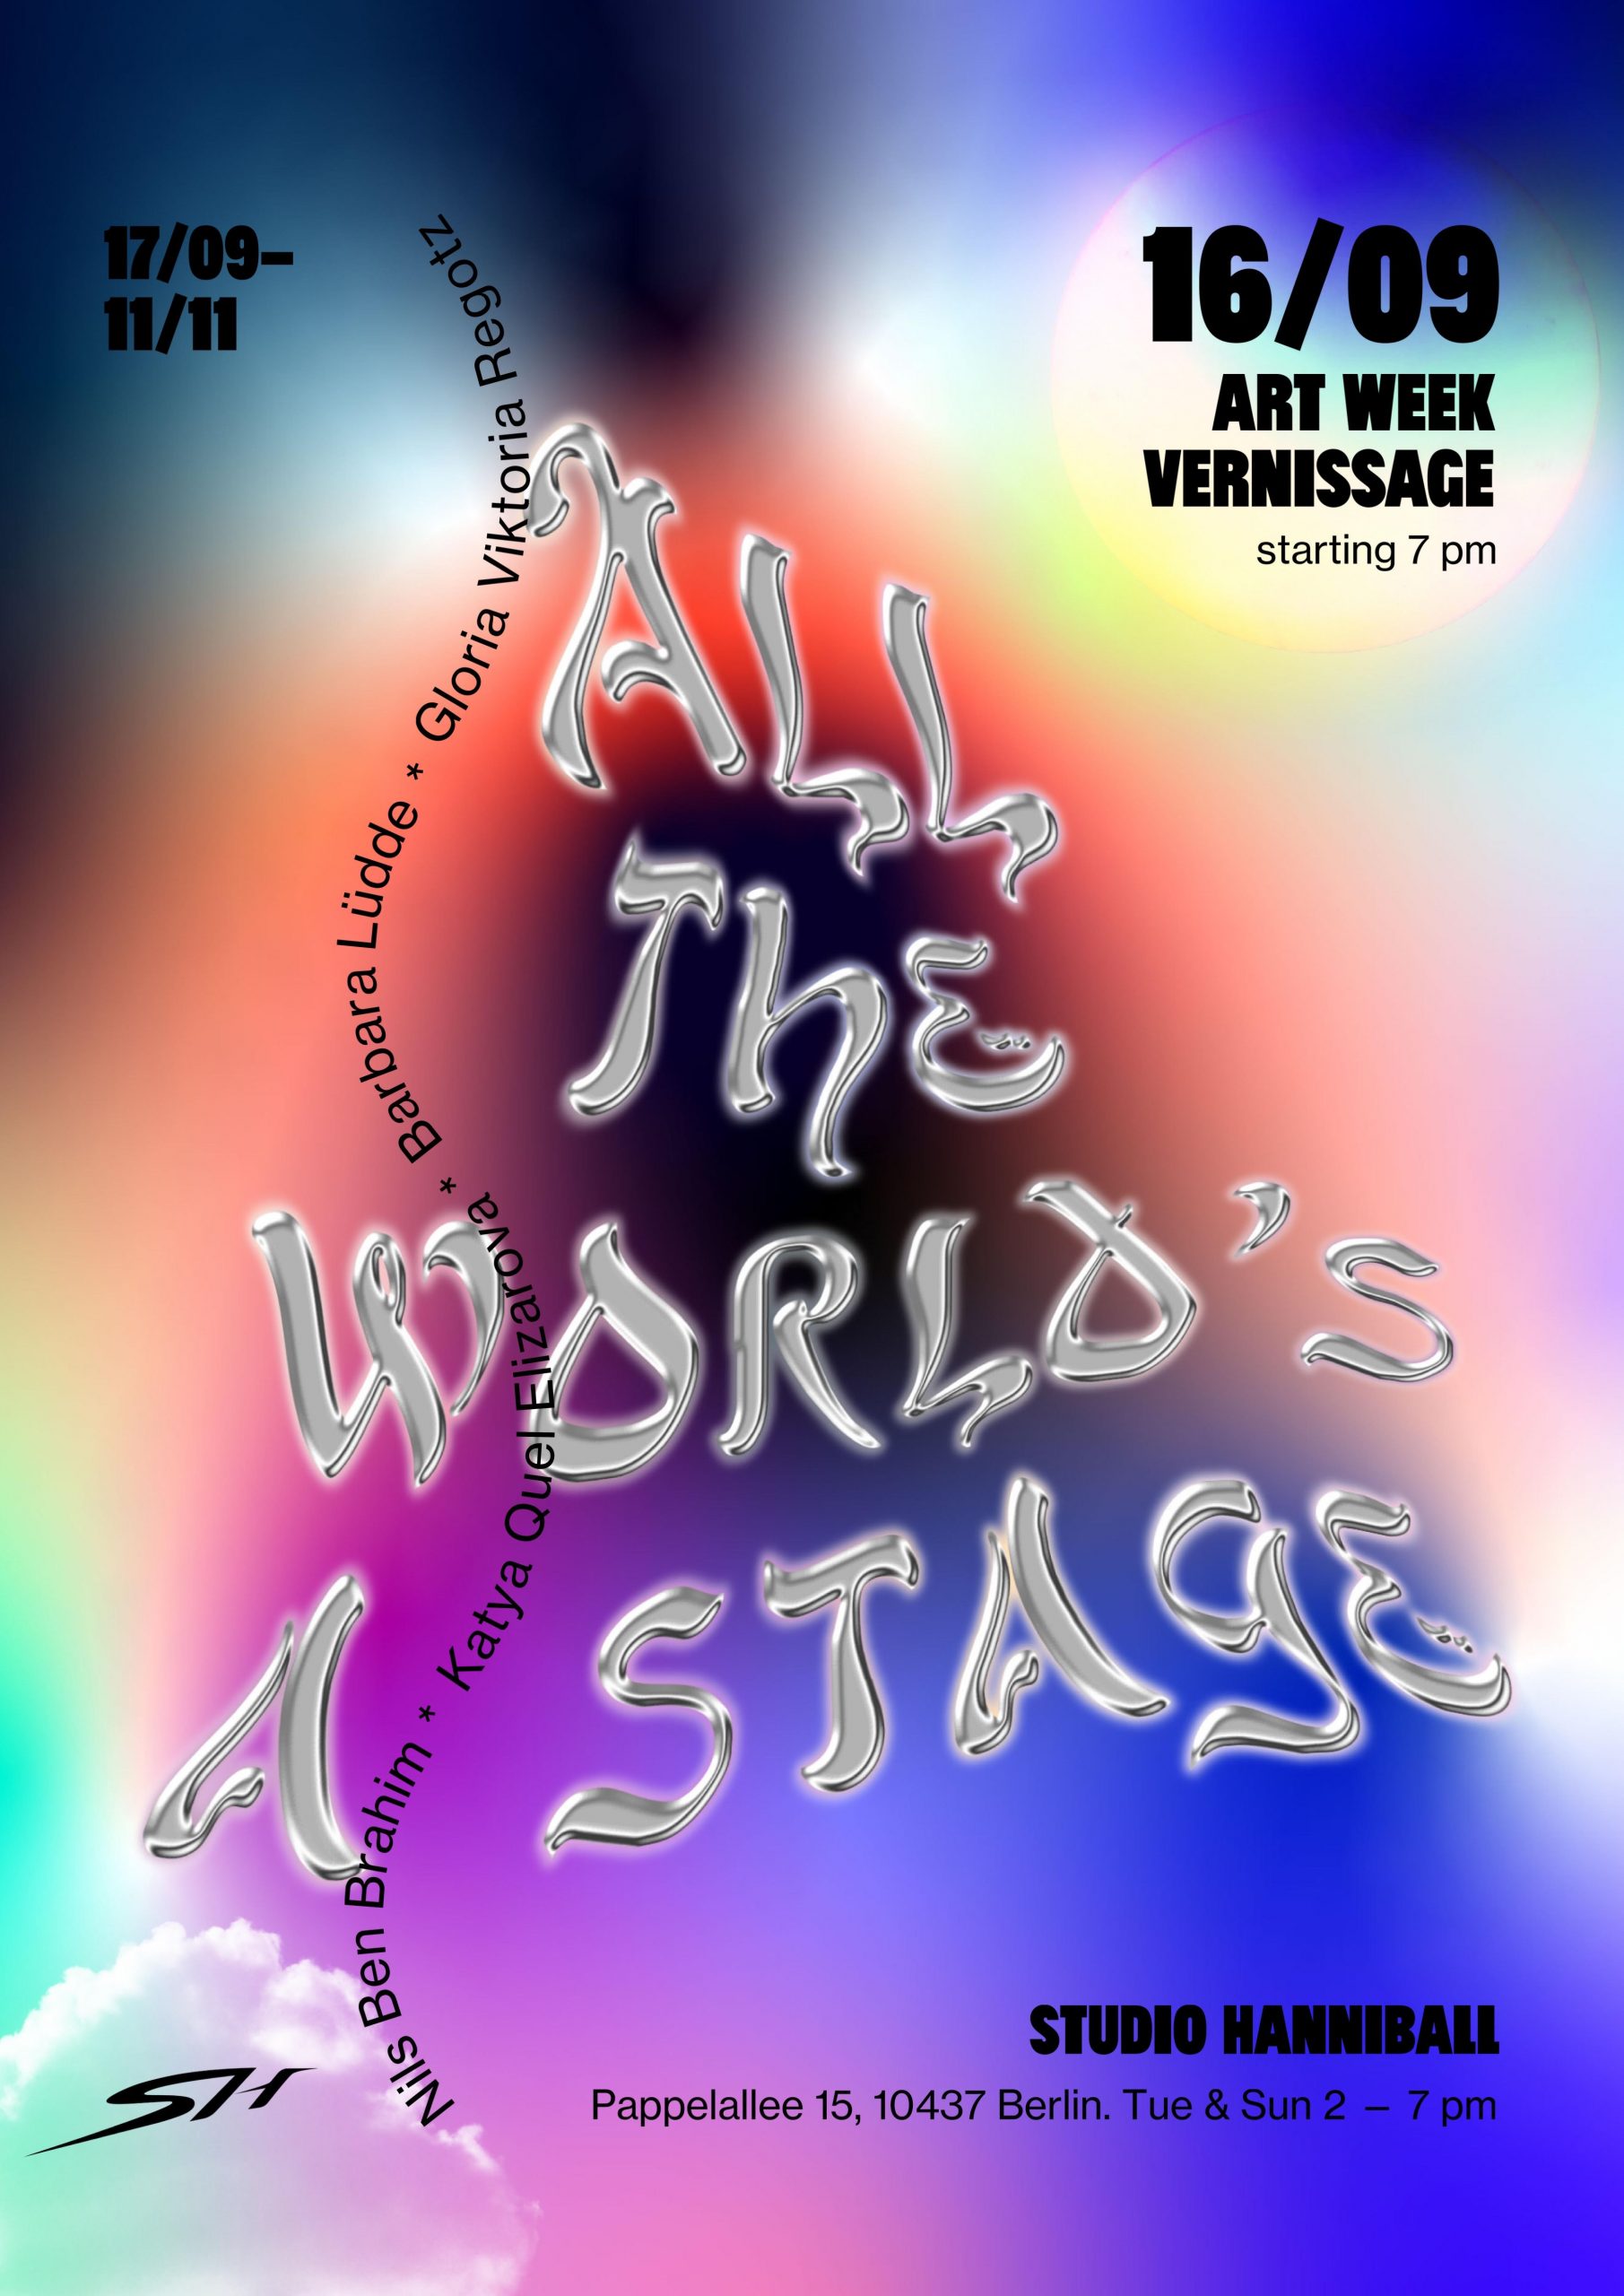 Studio Hanniball Event Exhibition All the World’s a Stage